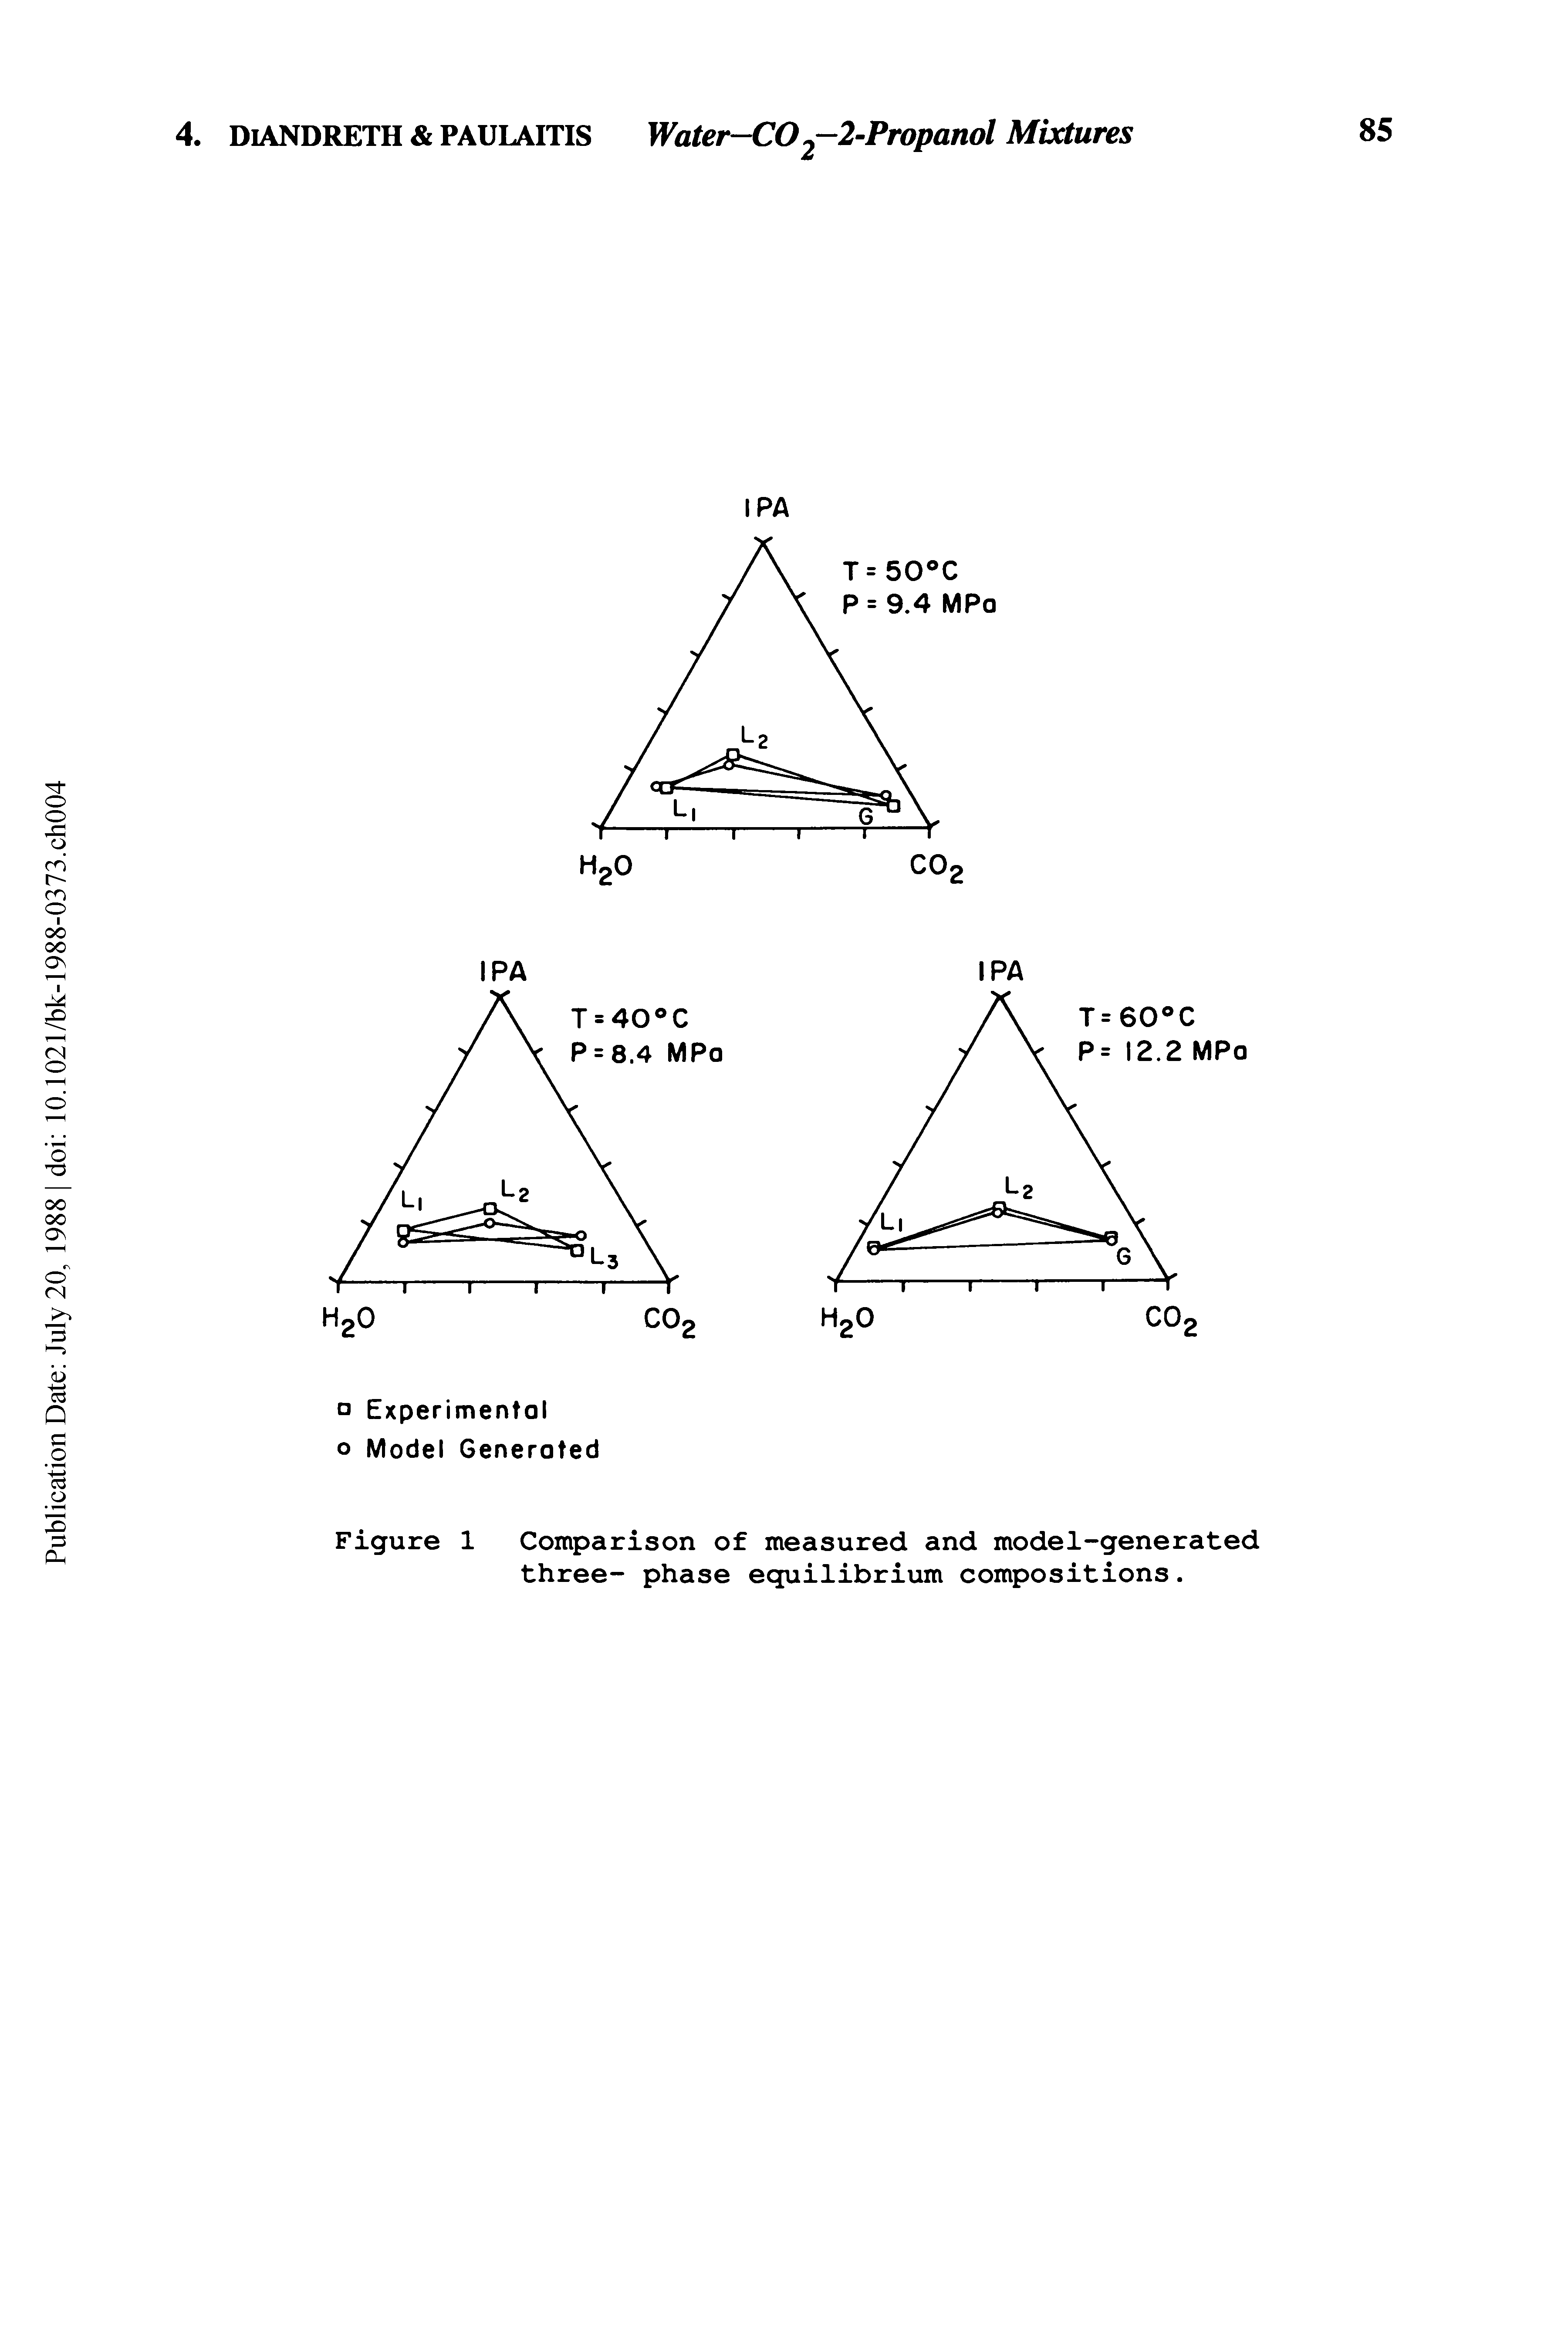 Figure 1 Comparison of measured and model-generated three- phase equilibrium compositions.